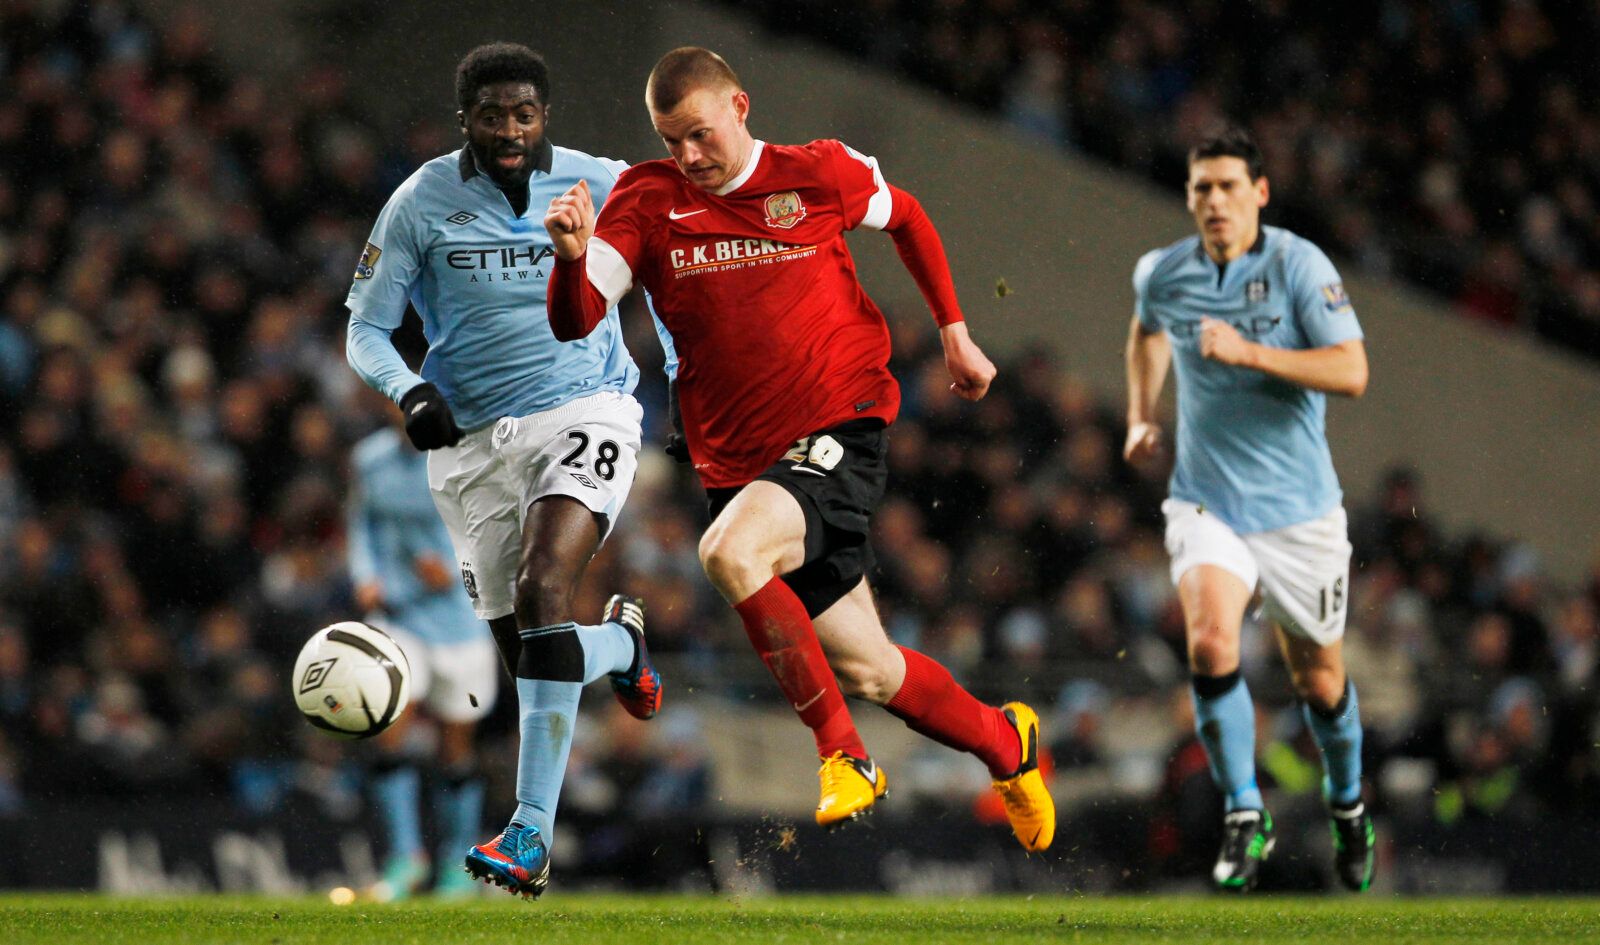 Football - Manchester City v Barnsley - FA Cup Quarter Final - Etihad Stadium - 9/3/13 
 Barnsley's Ryan Tunnicliffe (C) in action with Manchester City's Kolo Toure 
Mandatory Credit: Action Images / Craig Brough 
Livepic